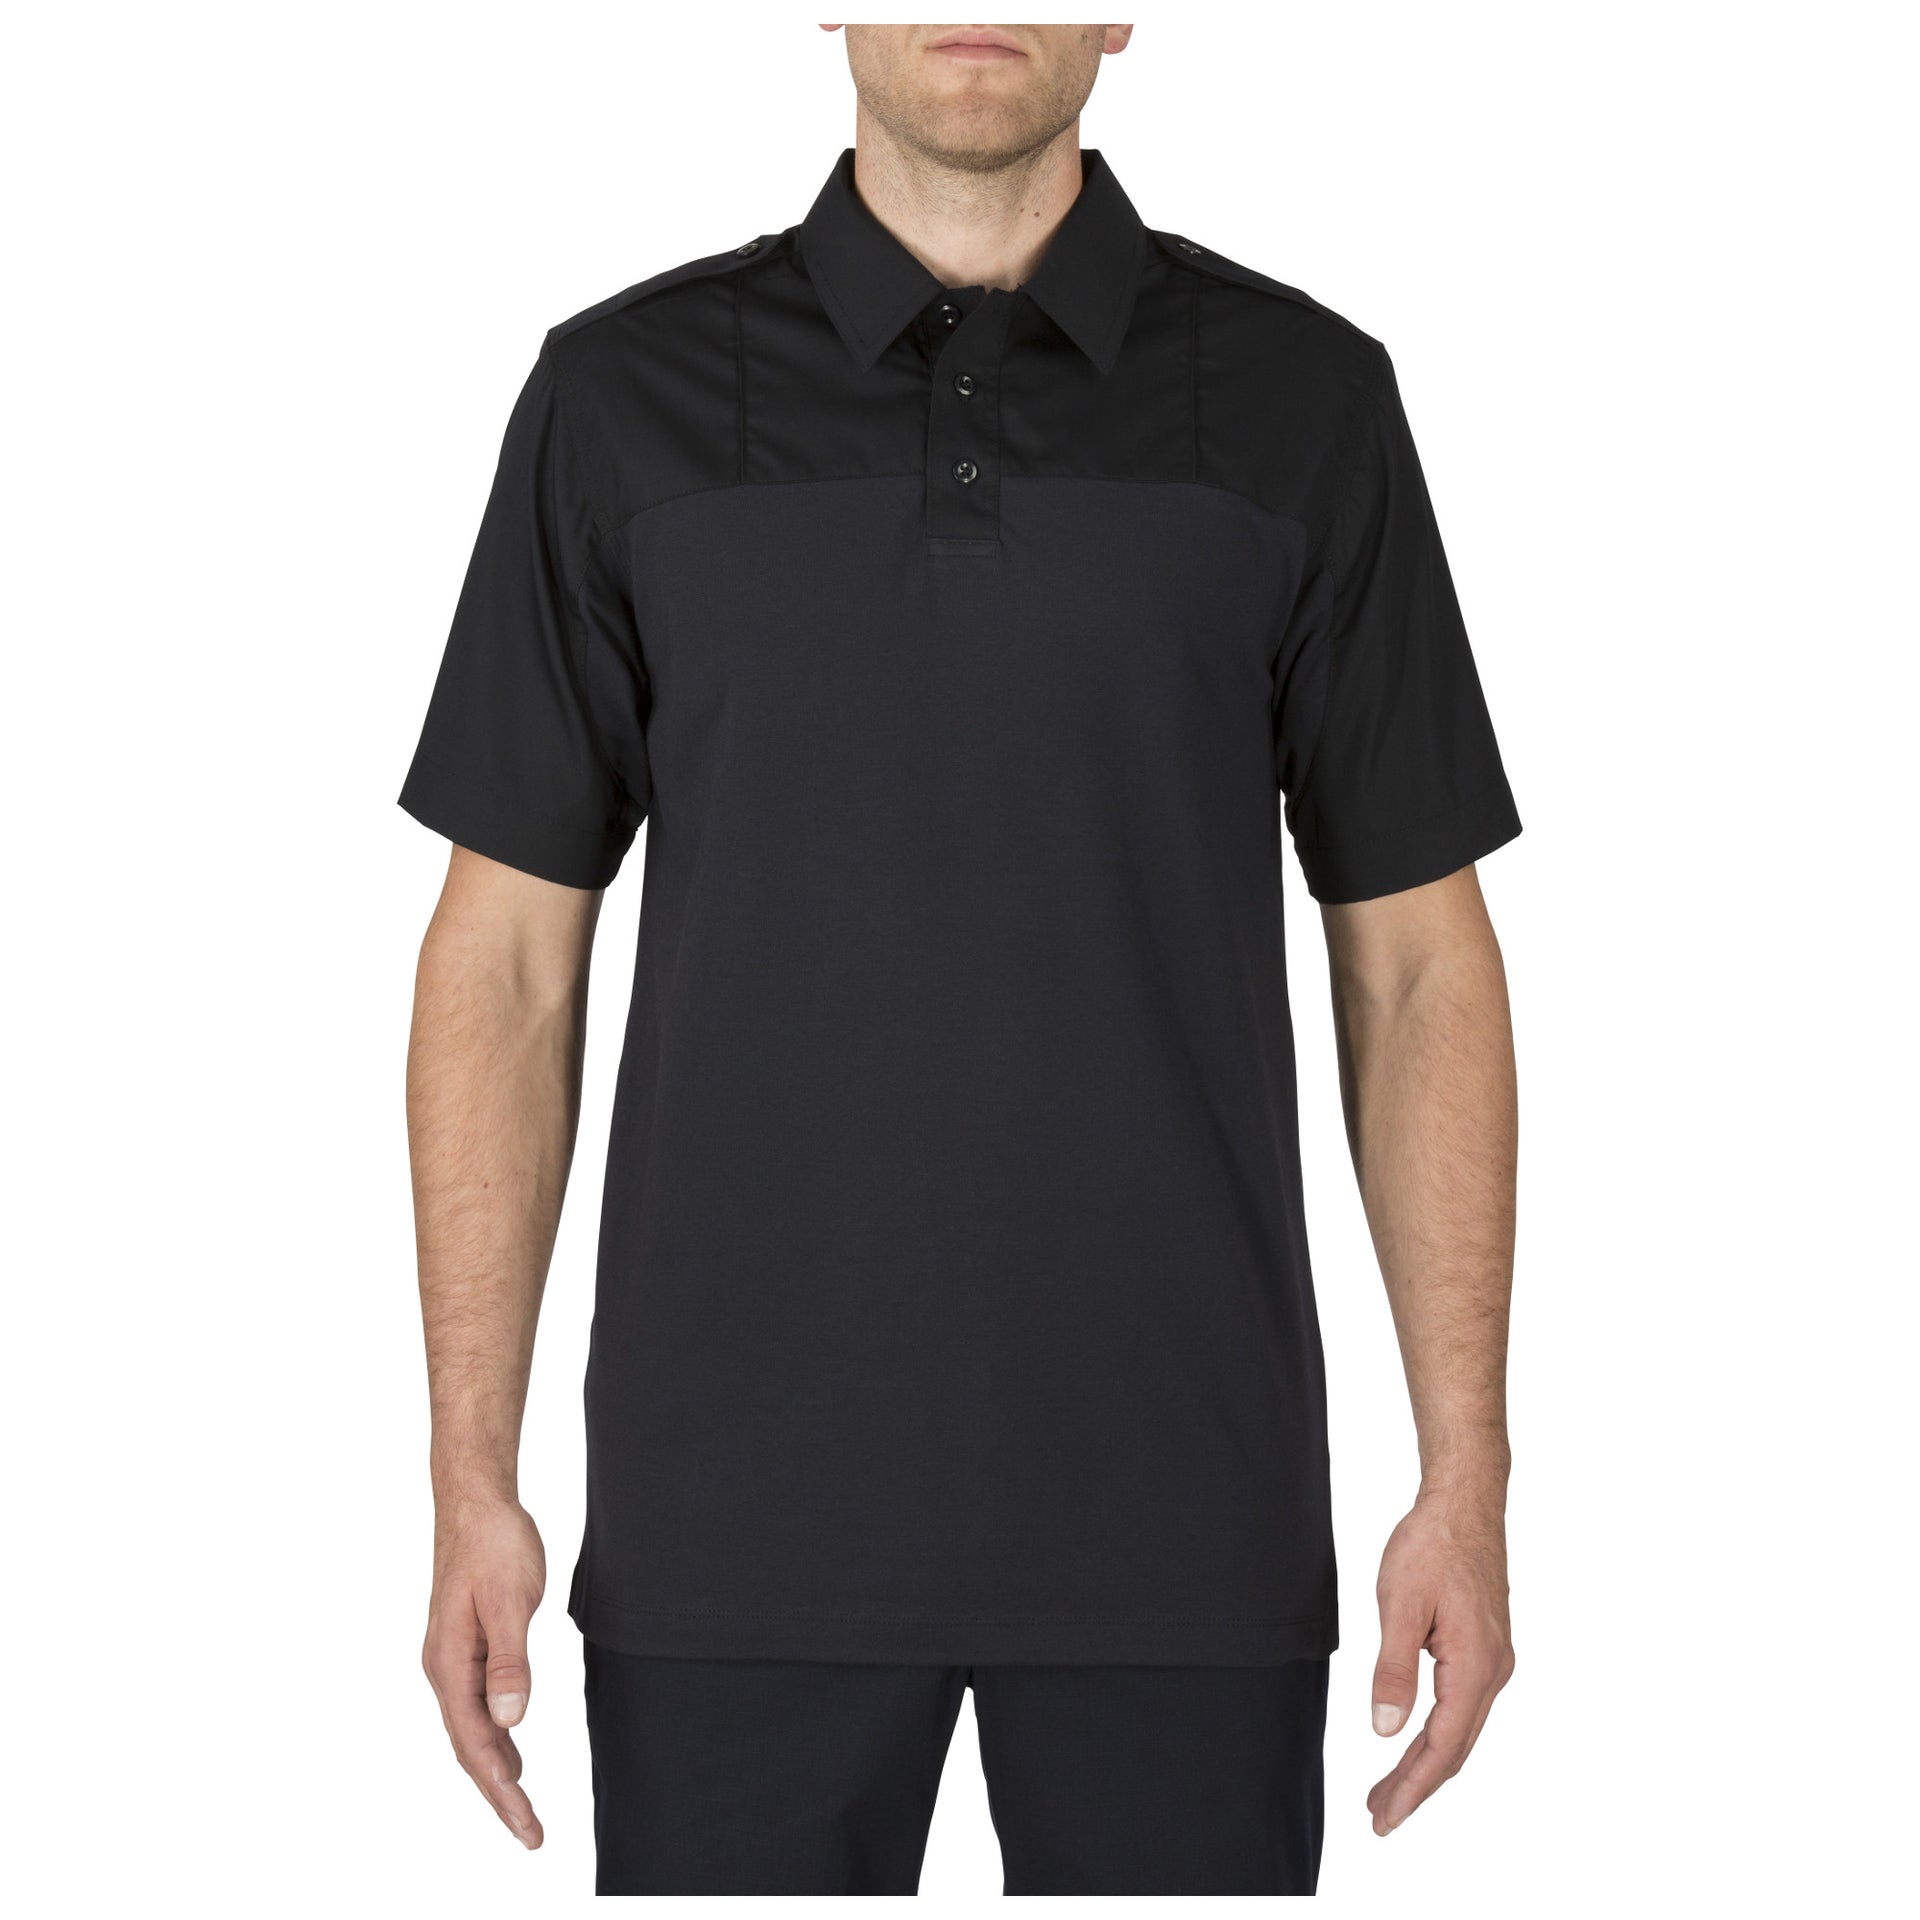 5.11 Tactical Stryke PDU Twill Rapid Short Sleeve Shirt (71406) | The Fire Center | Fuego Fire Center | Firefighter Gear | 5.11 Stryke® PDU® Rapid Shirt with Twill delivers comfort, durability, and high-performance utility in any field environment. Crafted from our Flex-Tac® mechanical stretch twill fabric on the upper body for uniform appearance and a knit lower body for comfort under an outer plate carrier